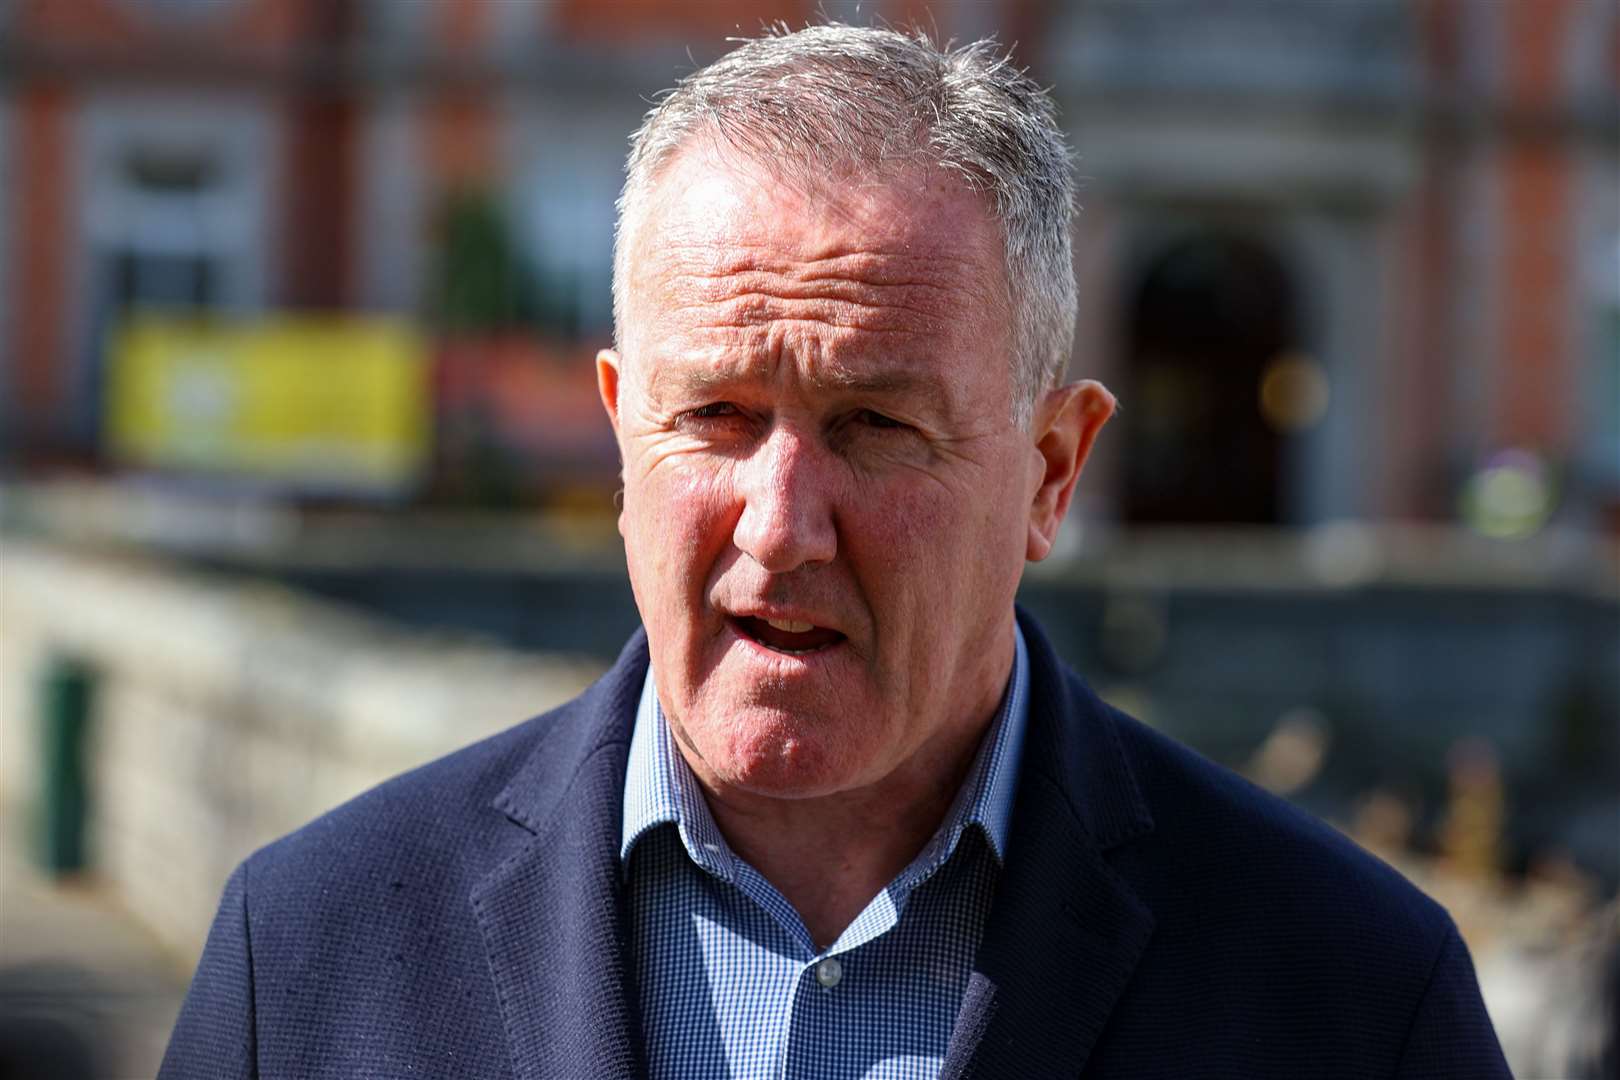 Sinn Fein MLA Conor Murphy called on the DUP to return to Stormont (PA)